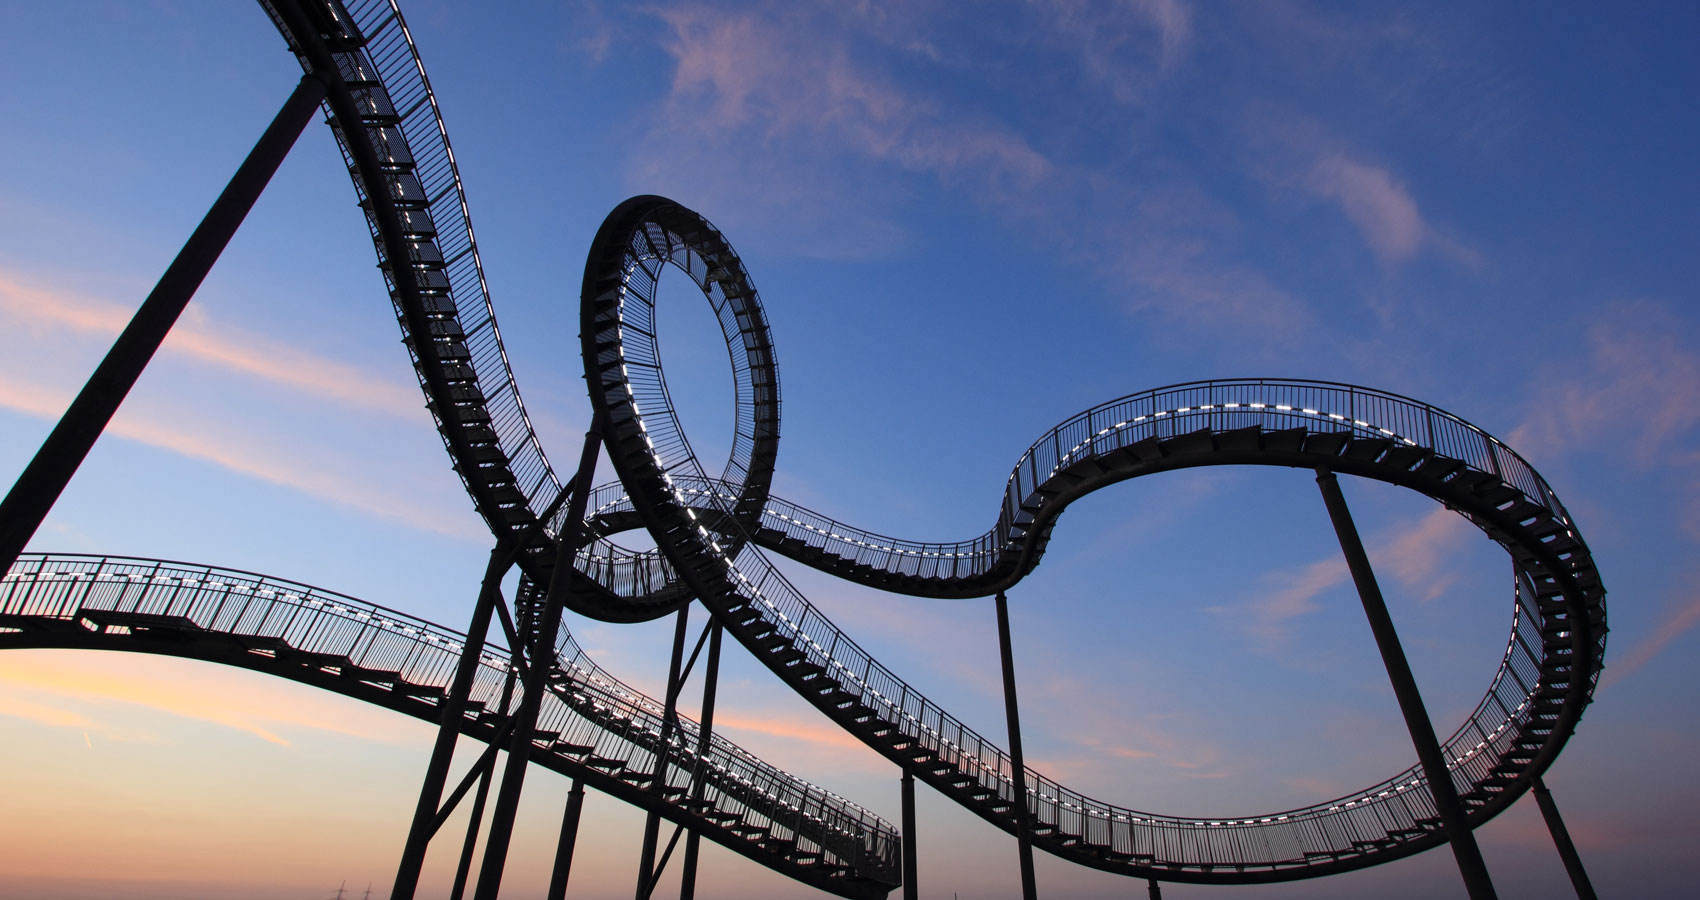 Life Is A Roller Coaster Ride, written by Urvashi Vats at Spillwords.com